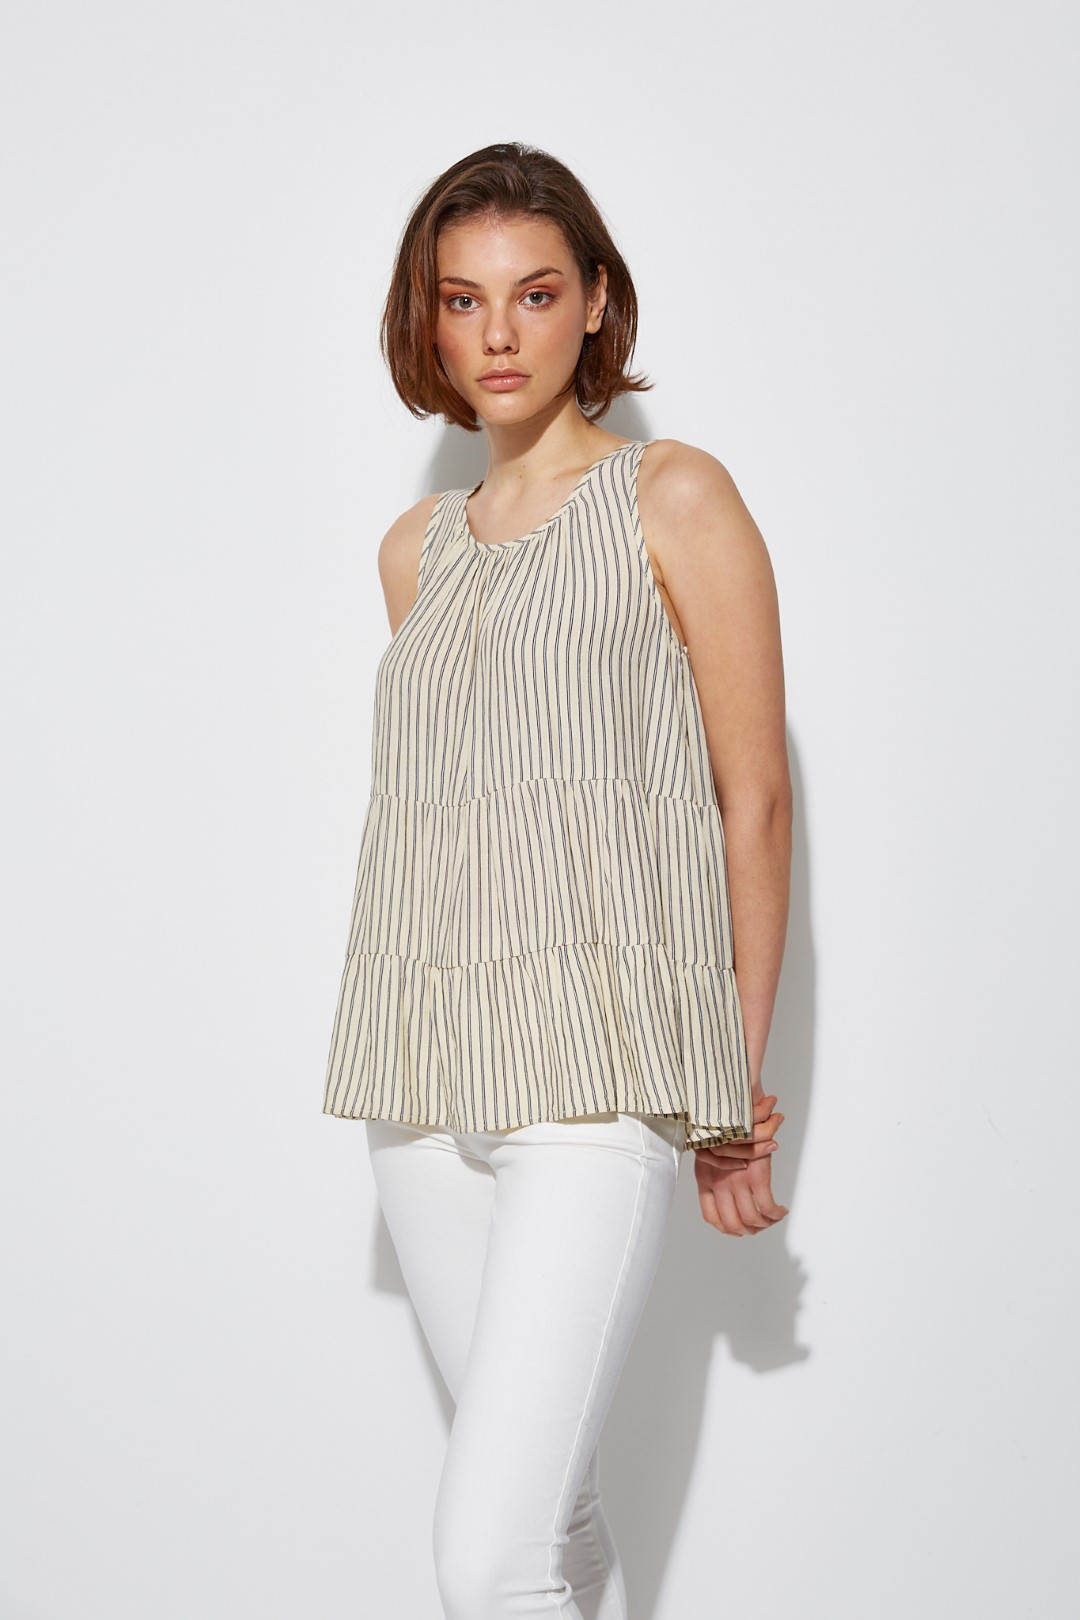 S/s blouses-top